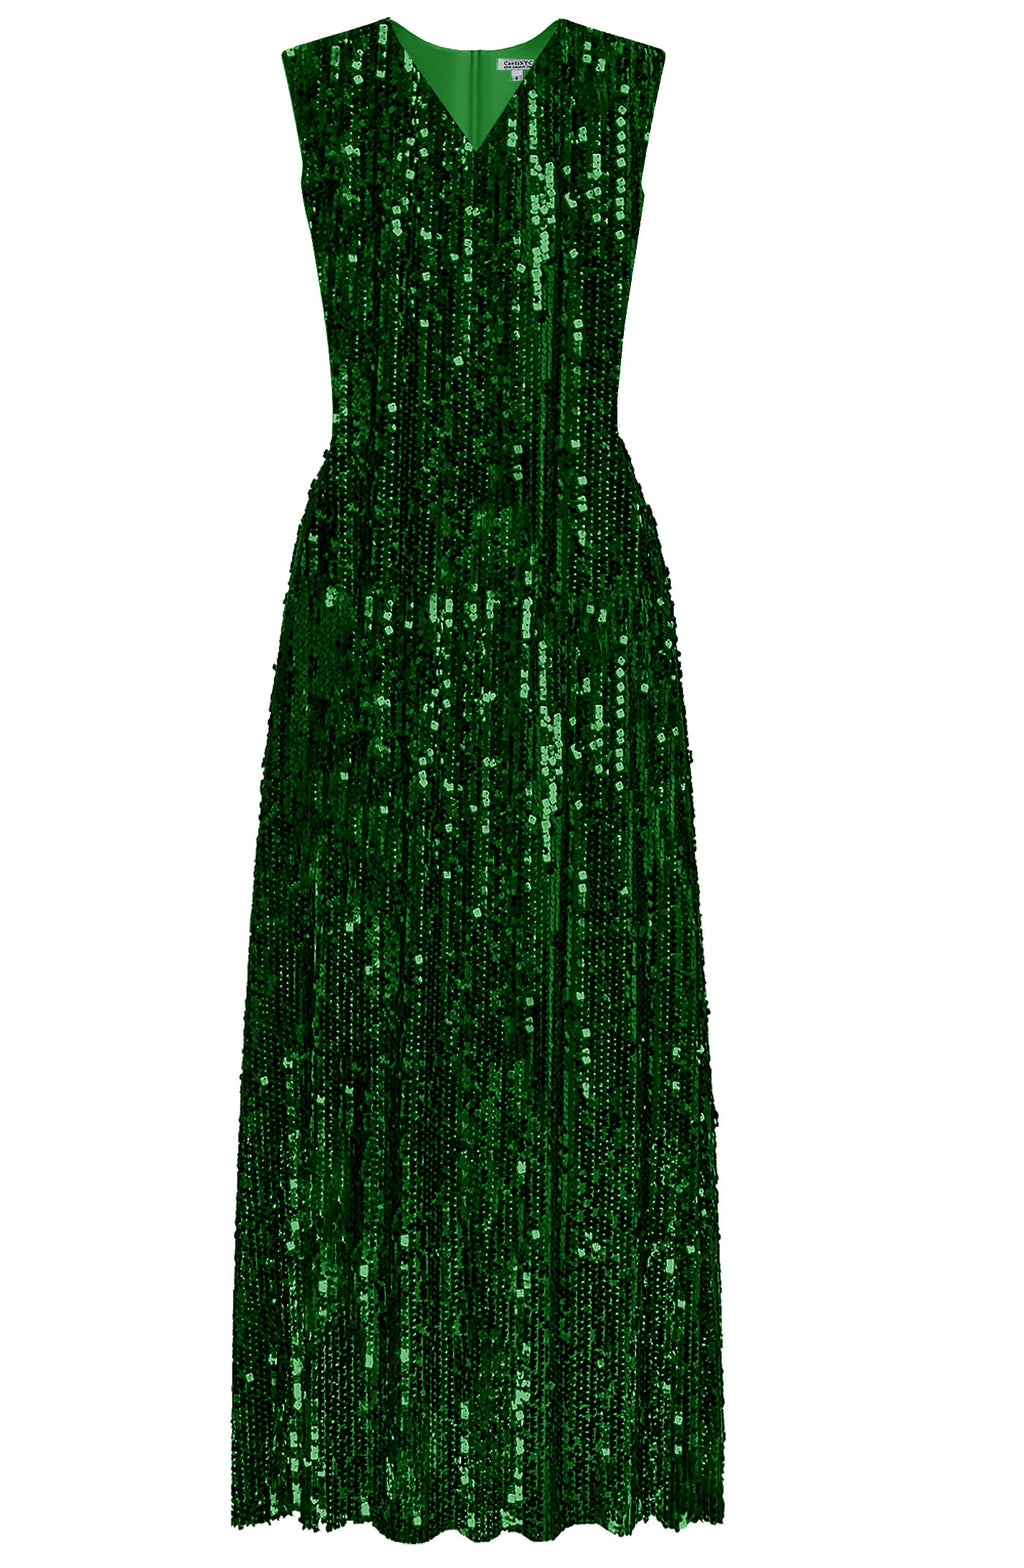 green sequin dress by caelinyc